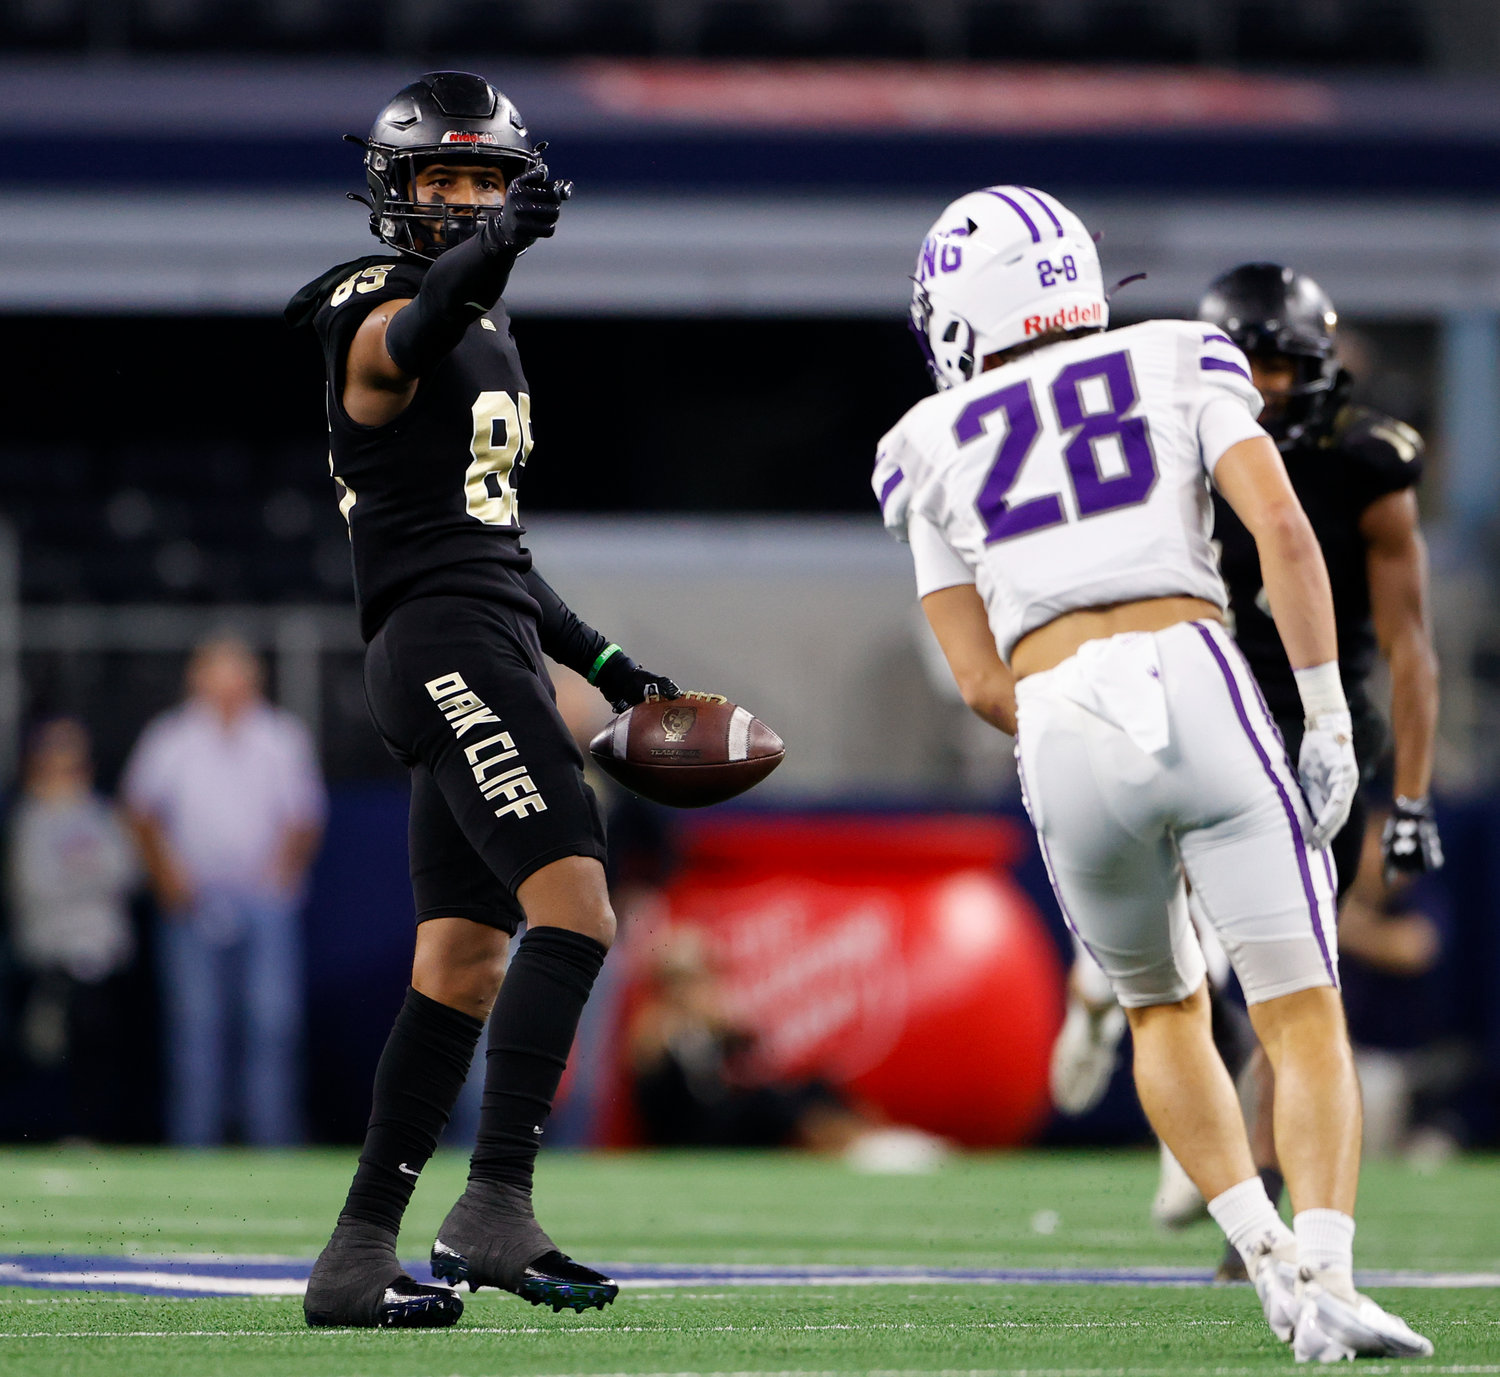 South Oak Cliff wide receiver Joshua Manley (85) gestures for a first down after a catch during the Class 5A Division II football state championship game between South Oak Cliff and Port Neches-Groves in Arlington, Texas, on Dec. 16, 2022.